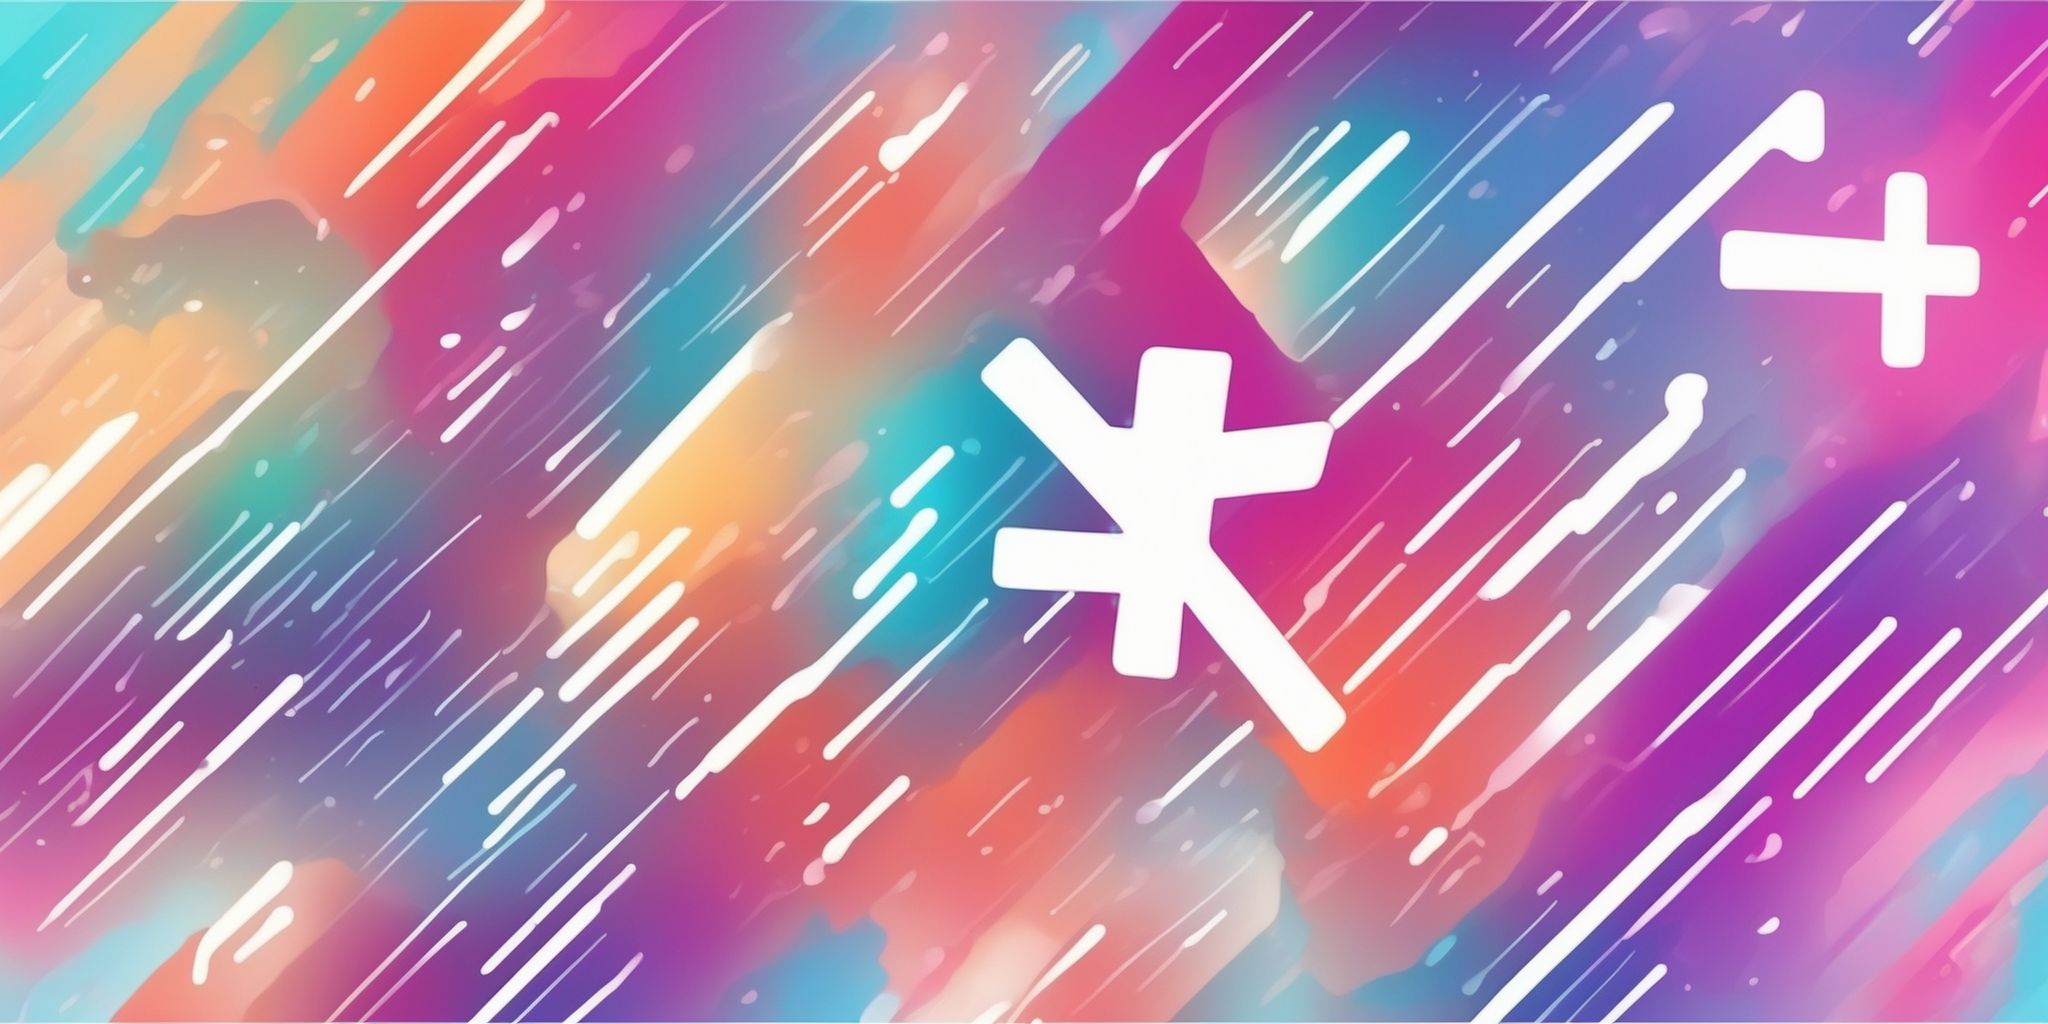 Hashtag in illustration style with gradients and white background